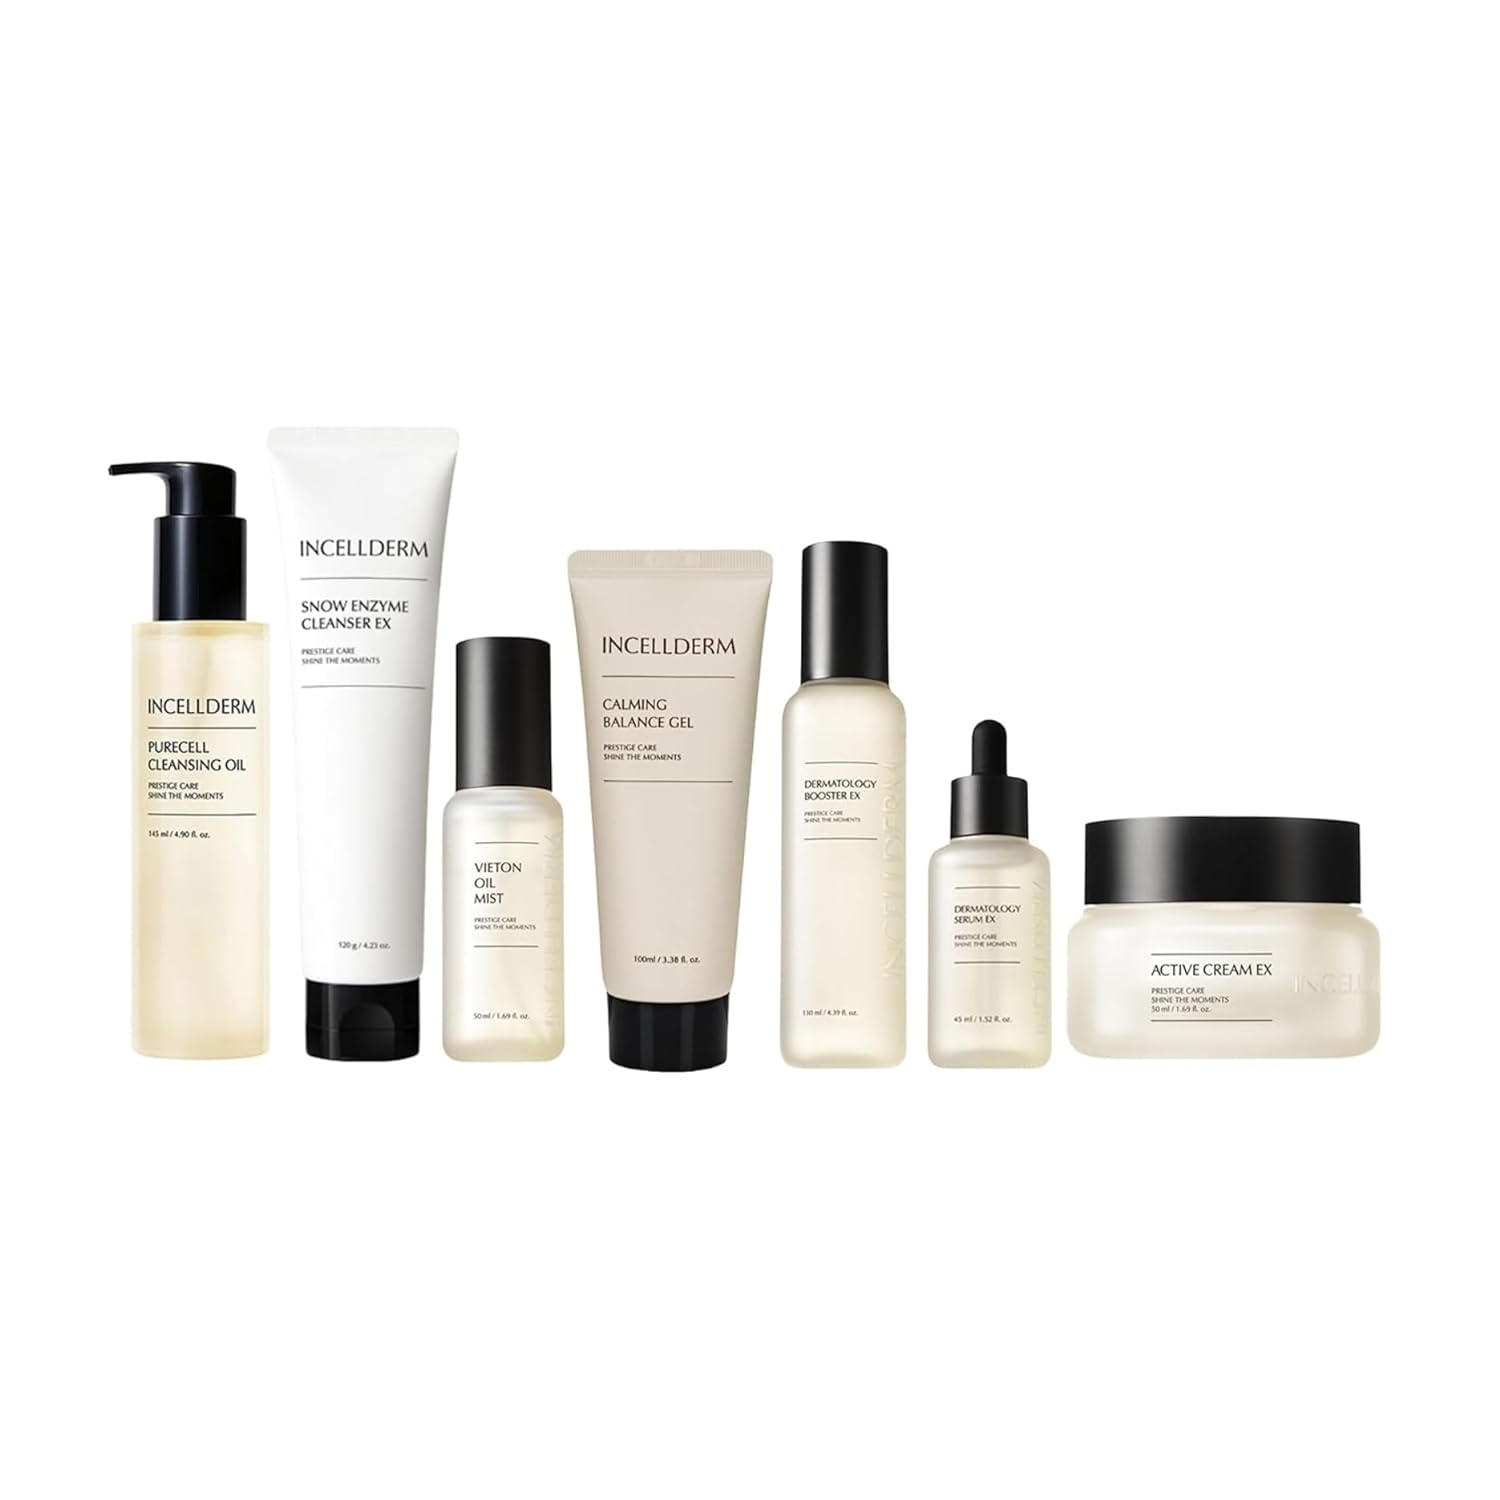 The INCELLDERM Daily Riman Ritual Kit is a skincare set designed for daily use